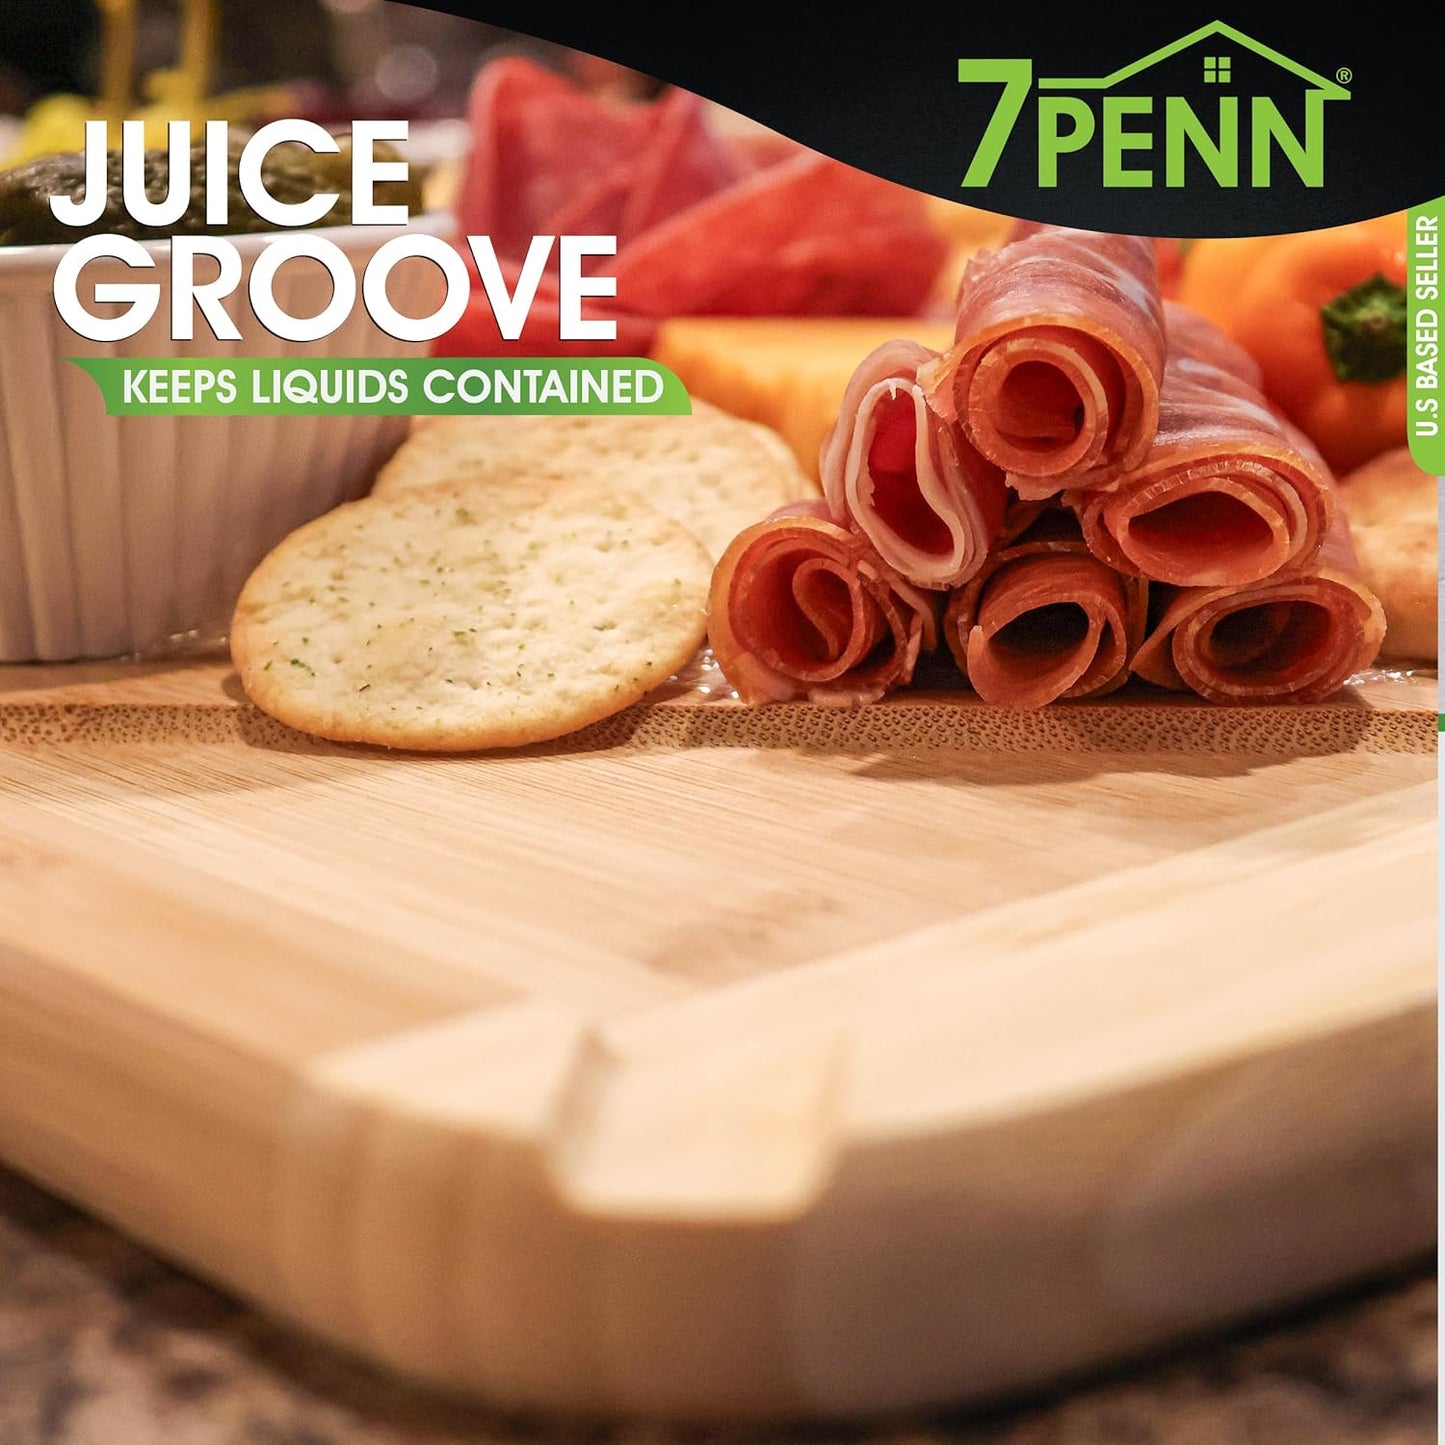 Cutting Boards for Kitchen 36x24 Inch - Extra Large Charcuterie Board Appetizer Serving Tray - Stovetop Bamboo Butchers Block Noodle Board with Juice Groove for Family Dinners and Entertaining